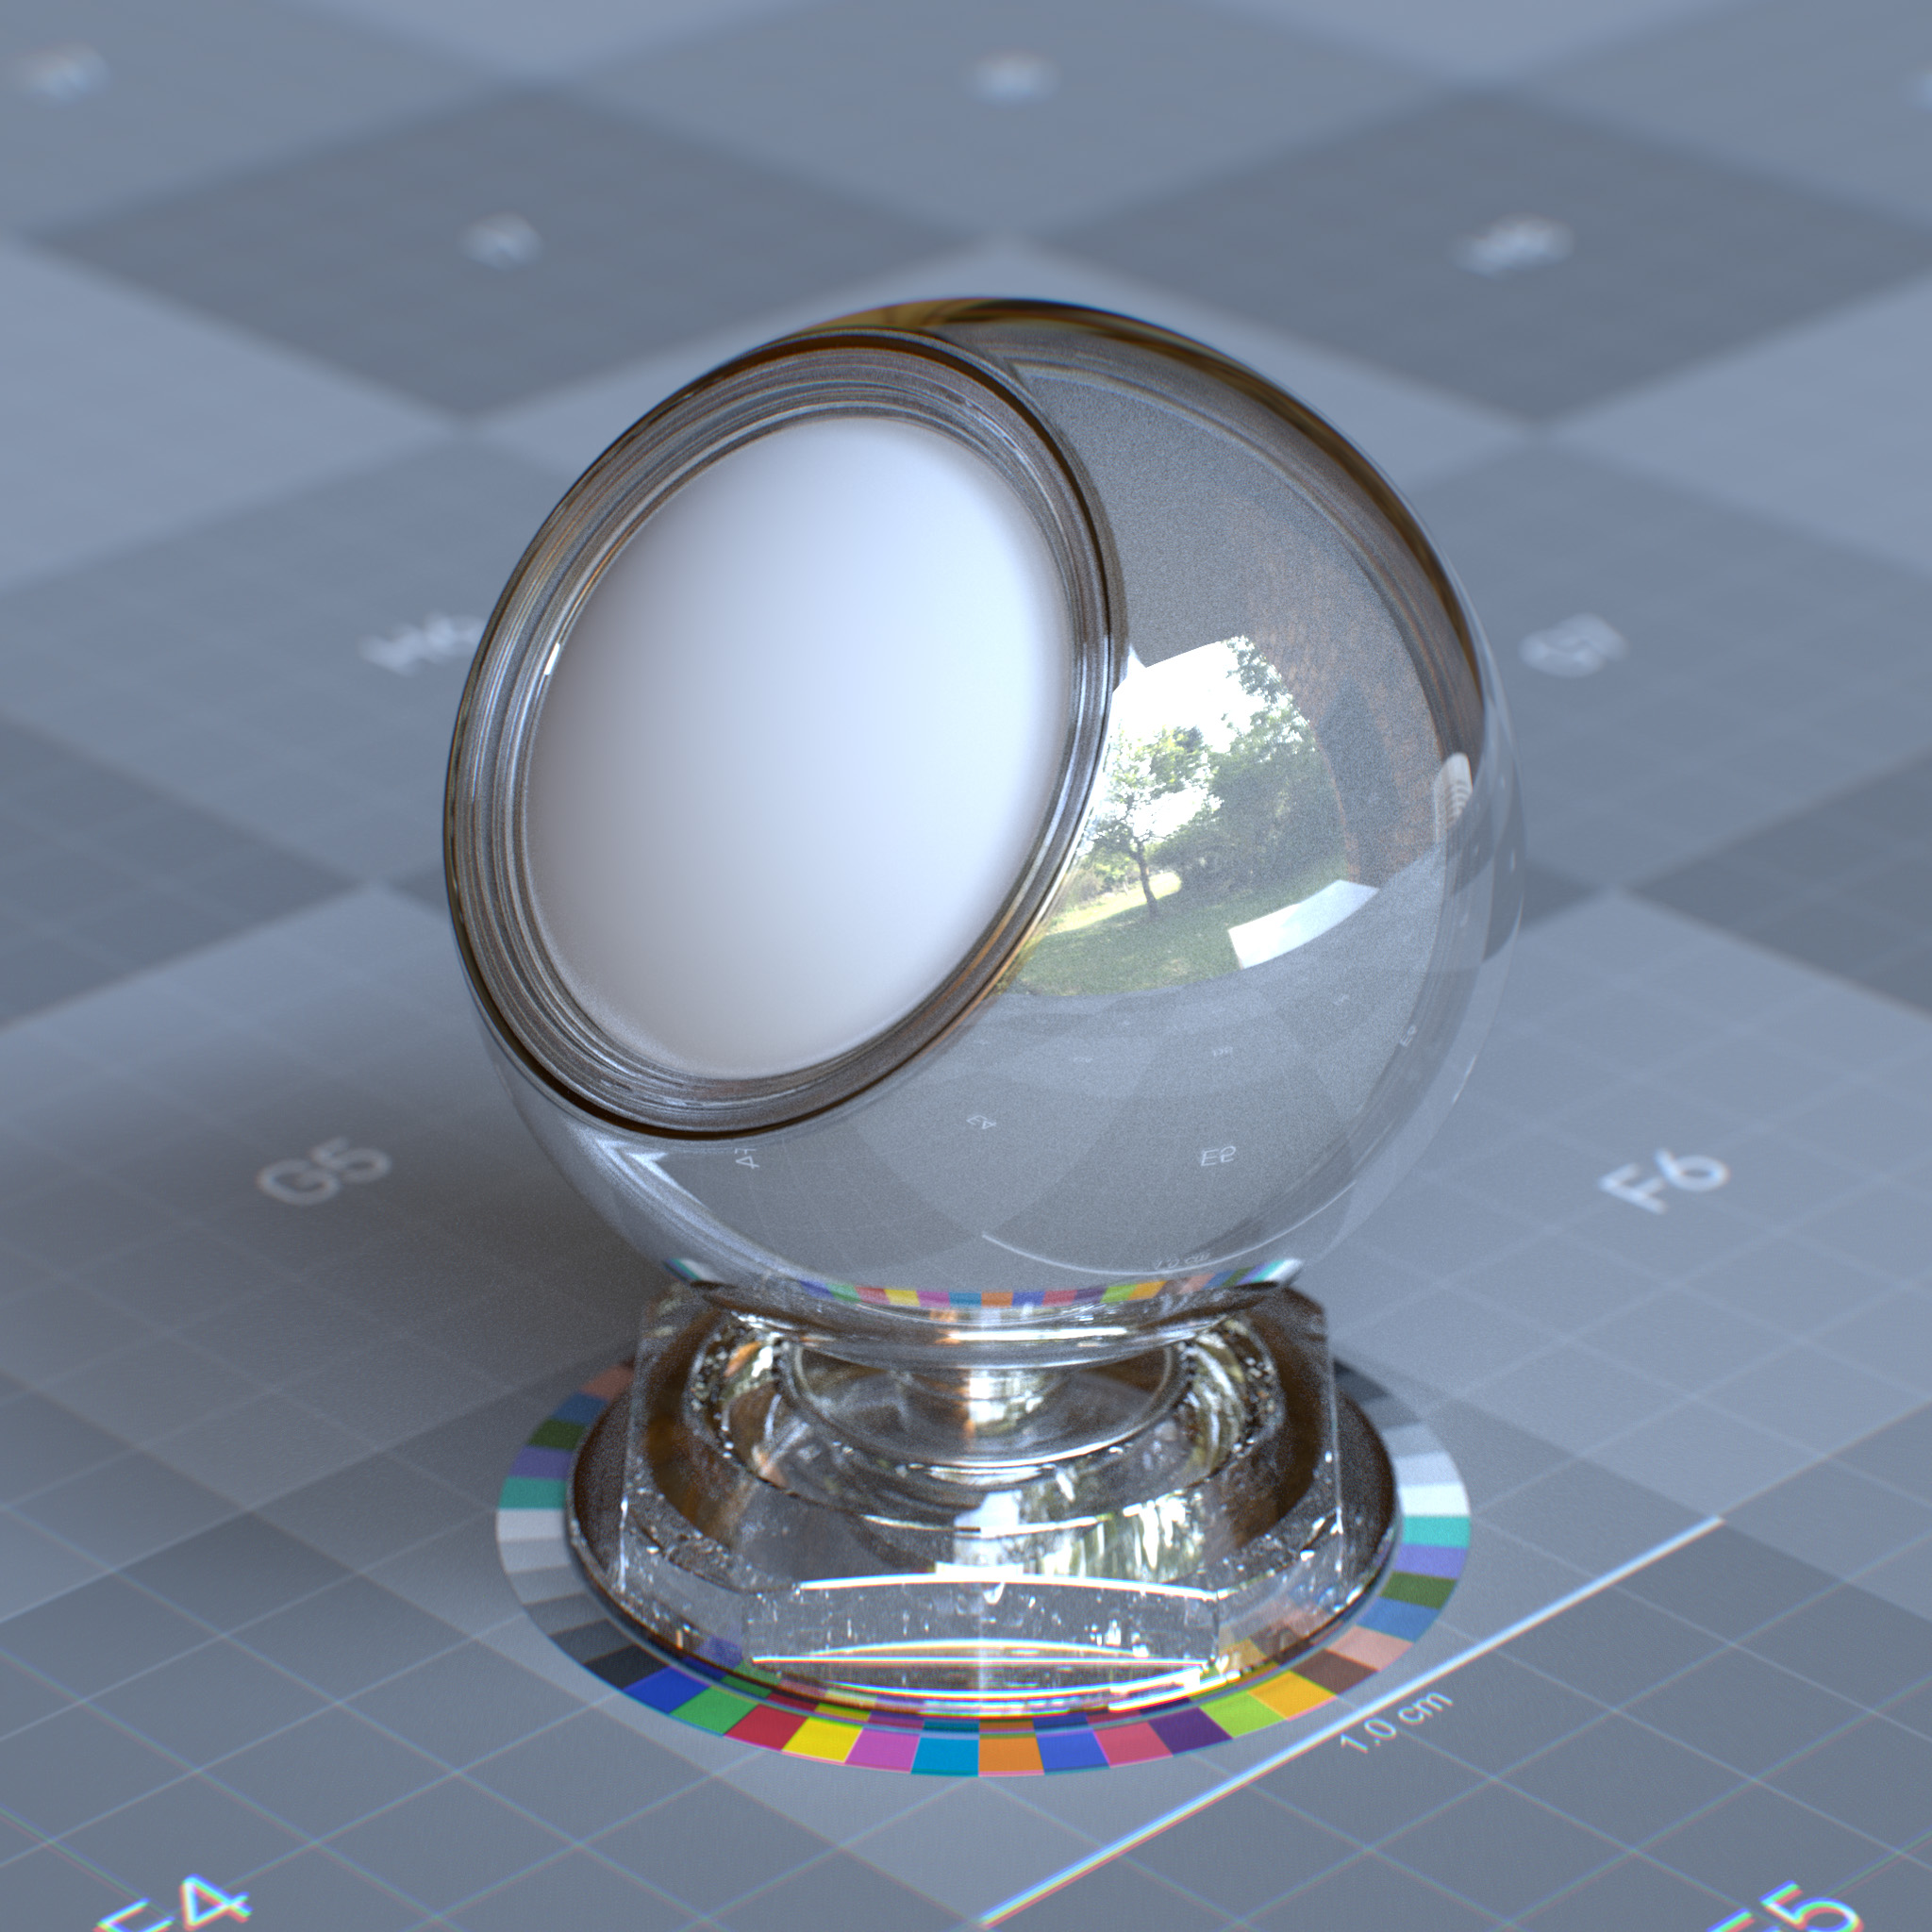 rtx_material_omnisurfacebase_specular_reflection_ior_5p0_refraction